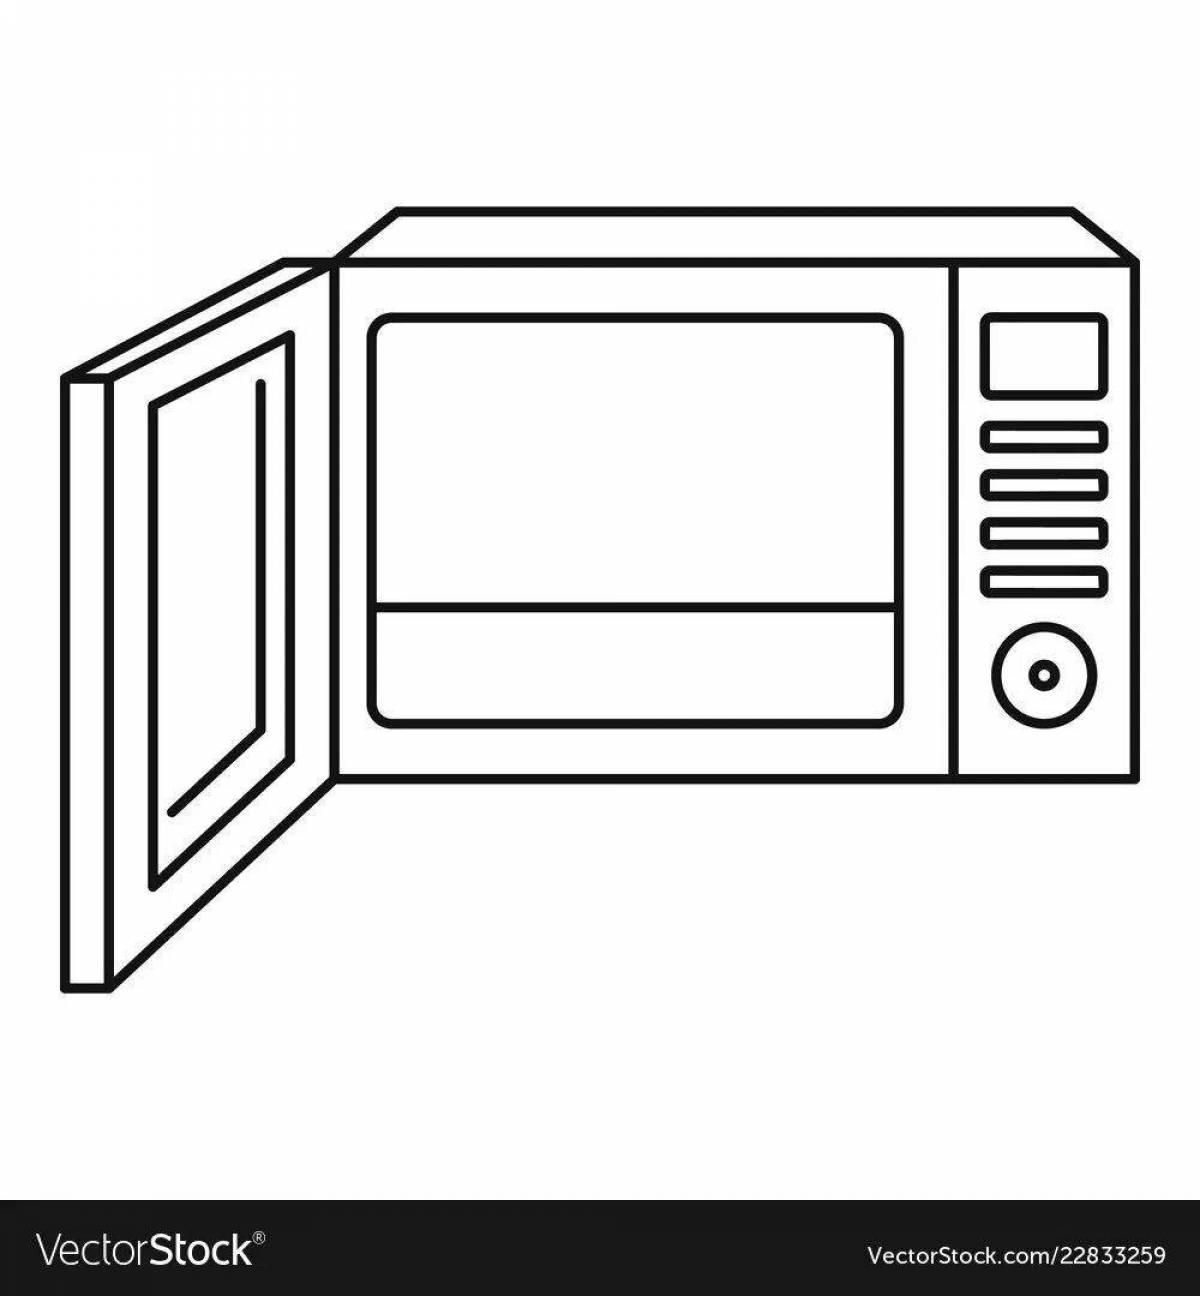 Awesome microwave coloring page